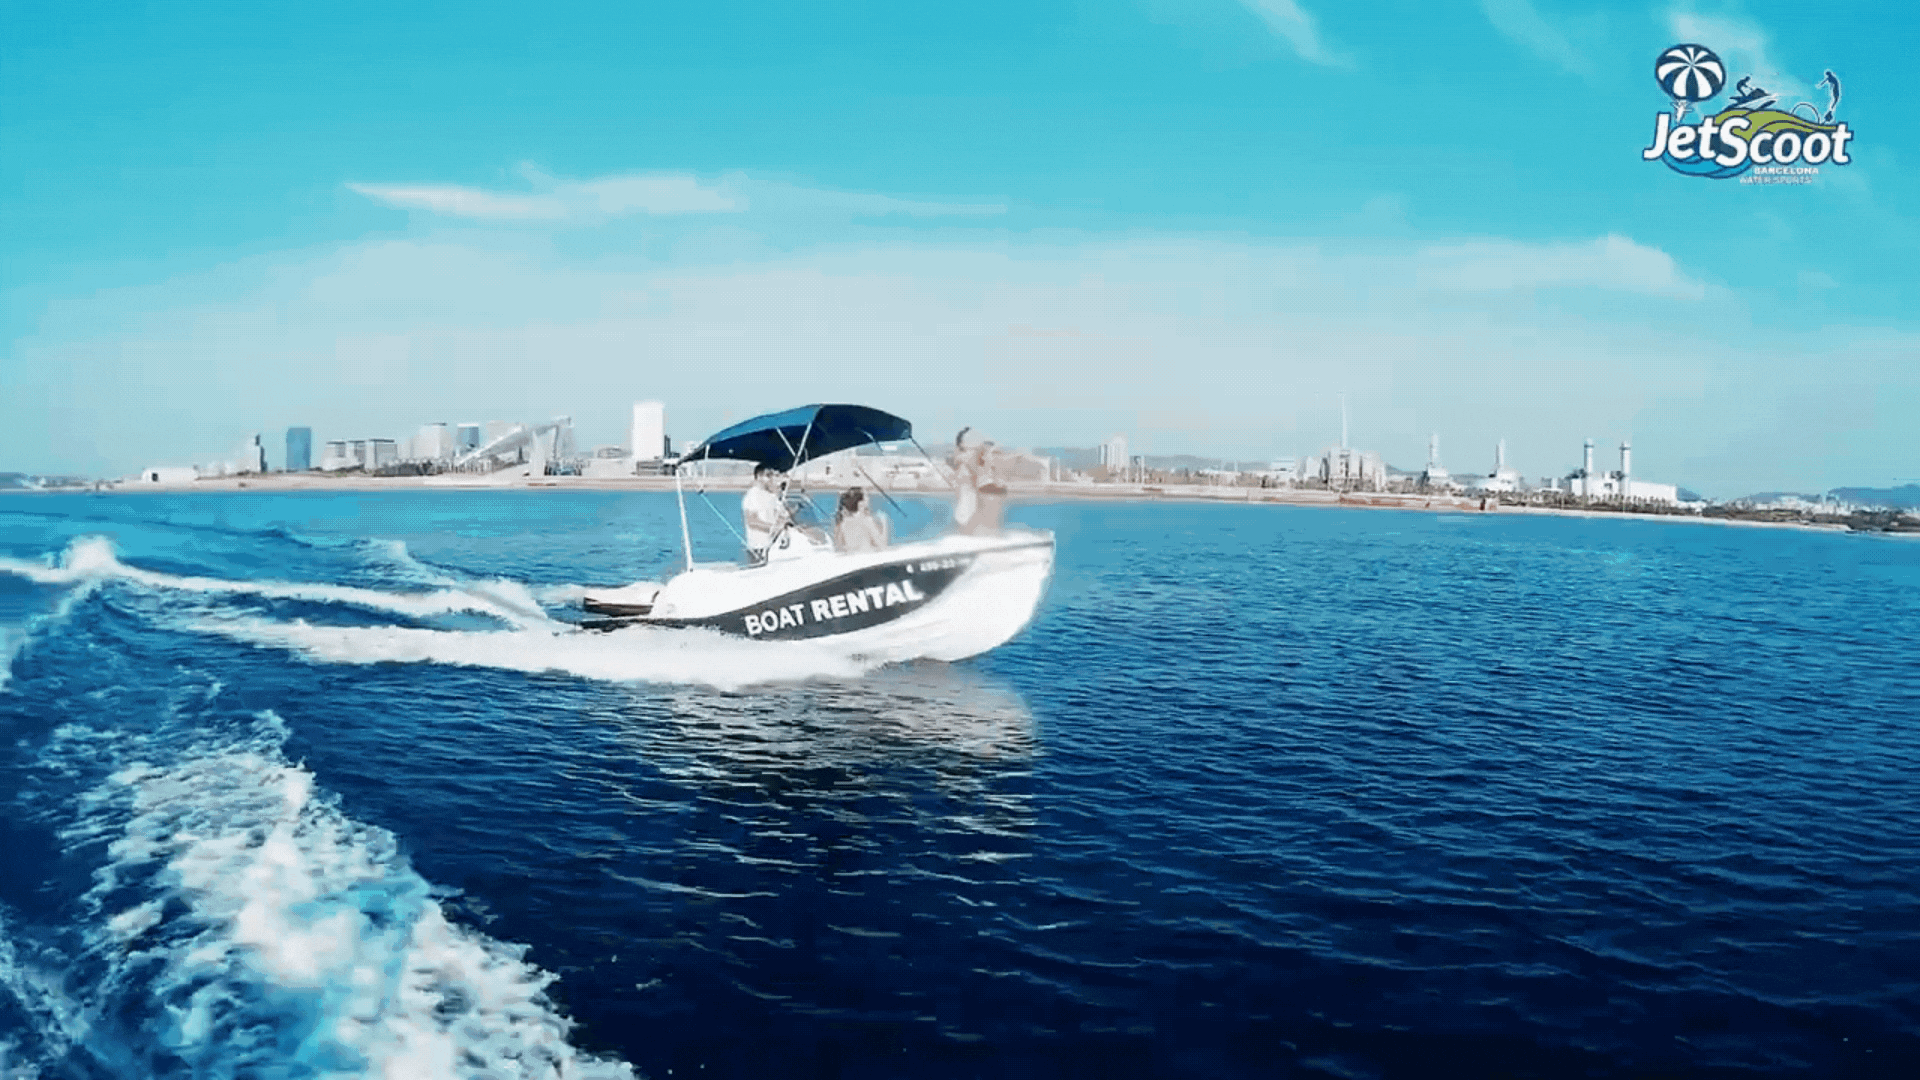 Boat rental service Barcelona with JetScoot